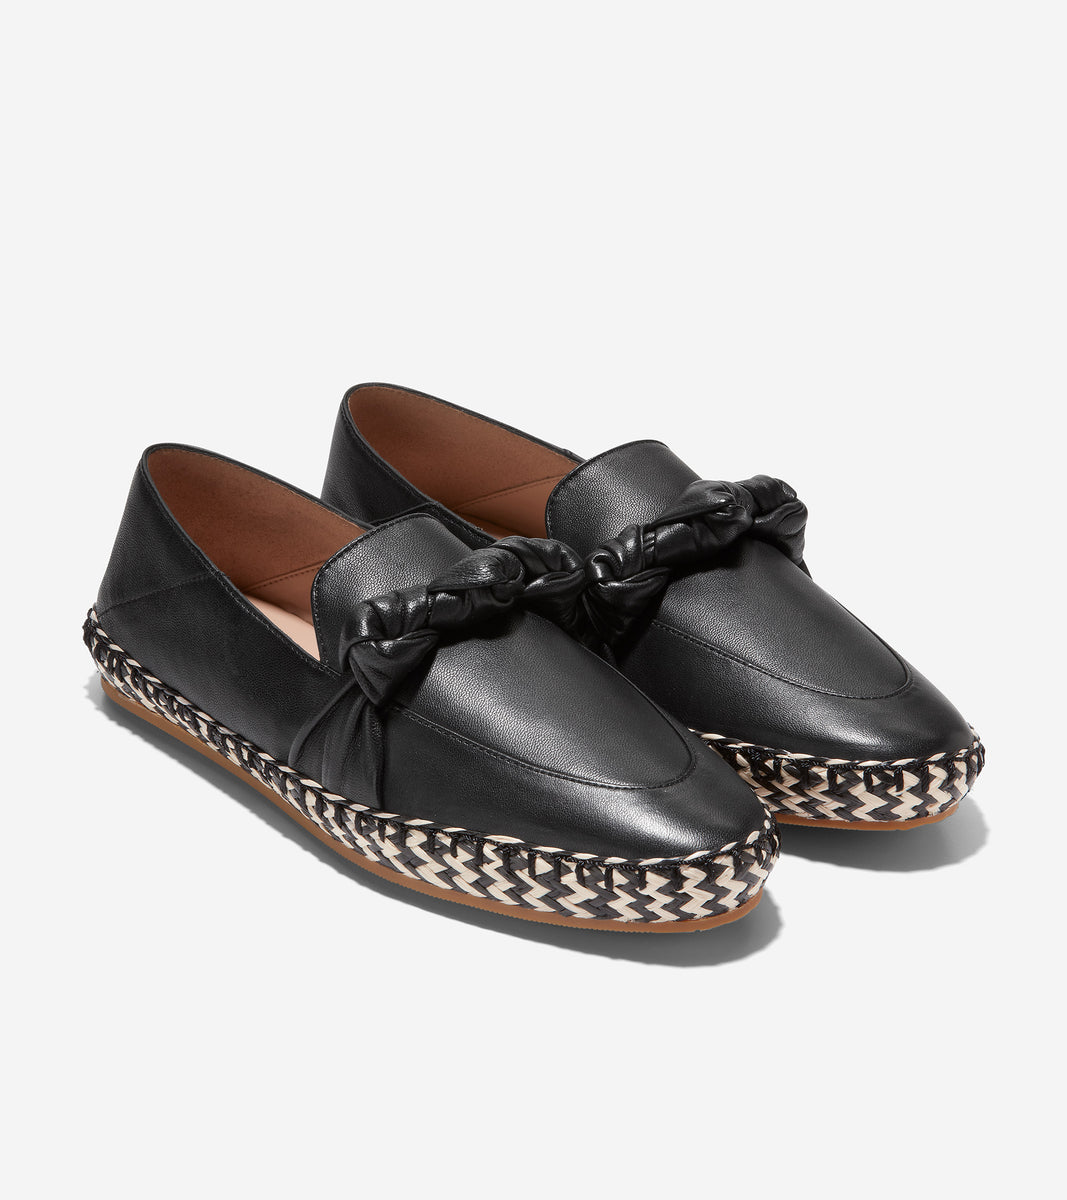 w26289-Women's Cloudfeel Knotted Espadrille-Black Leather